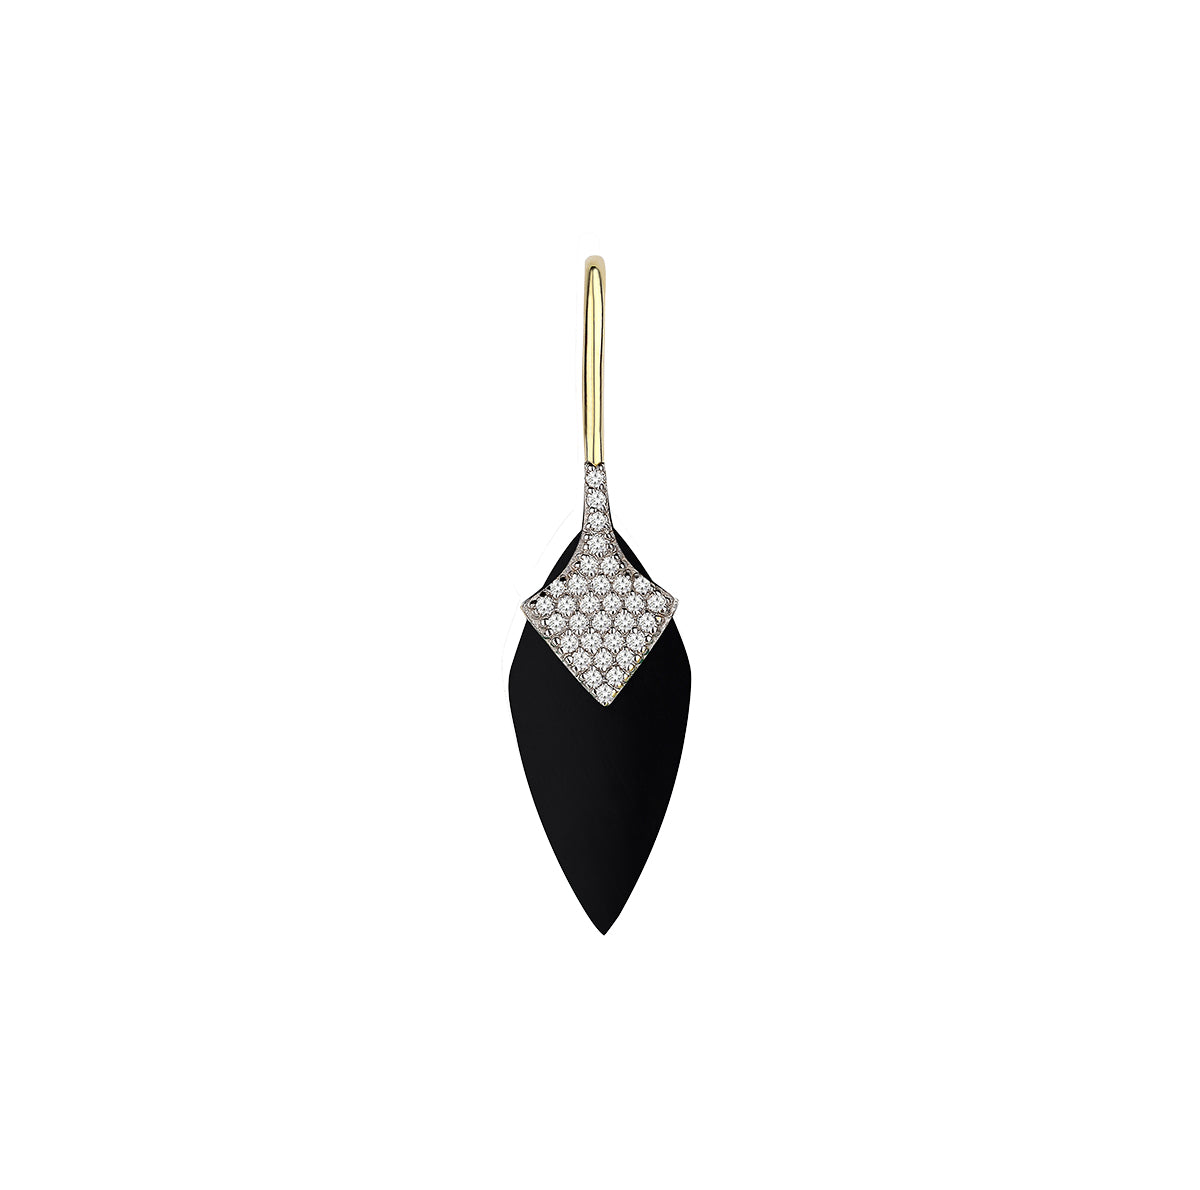 Drop Of Life Earring in Yellow Gold - Her Story Shop